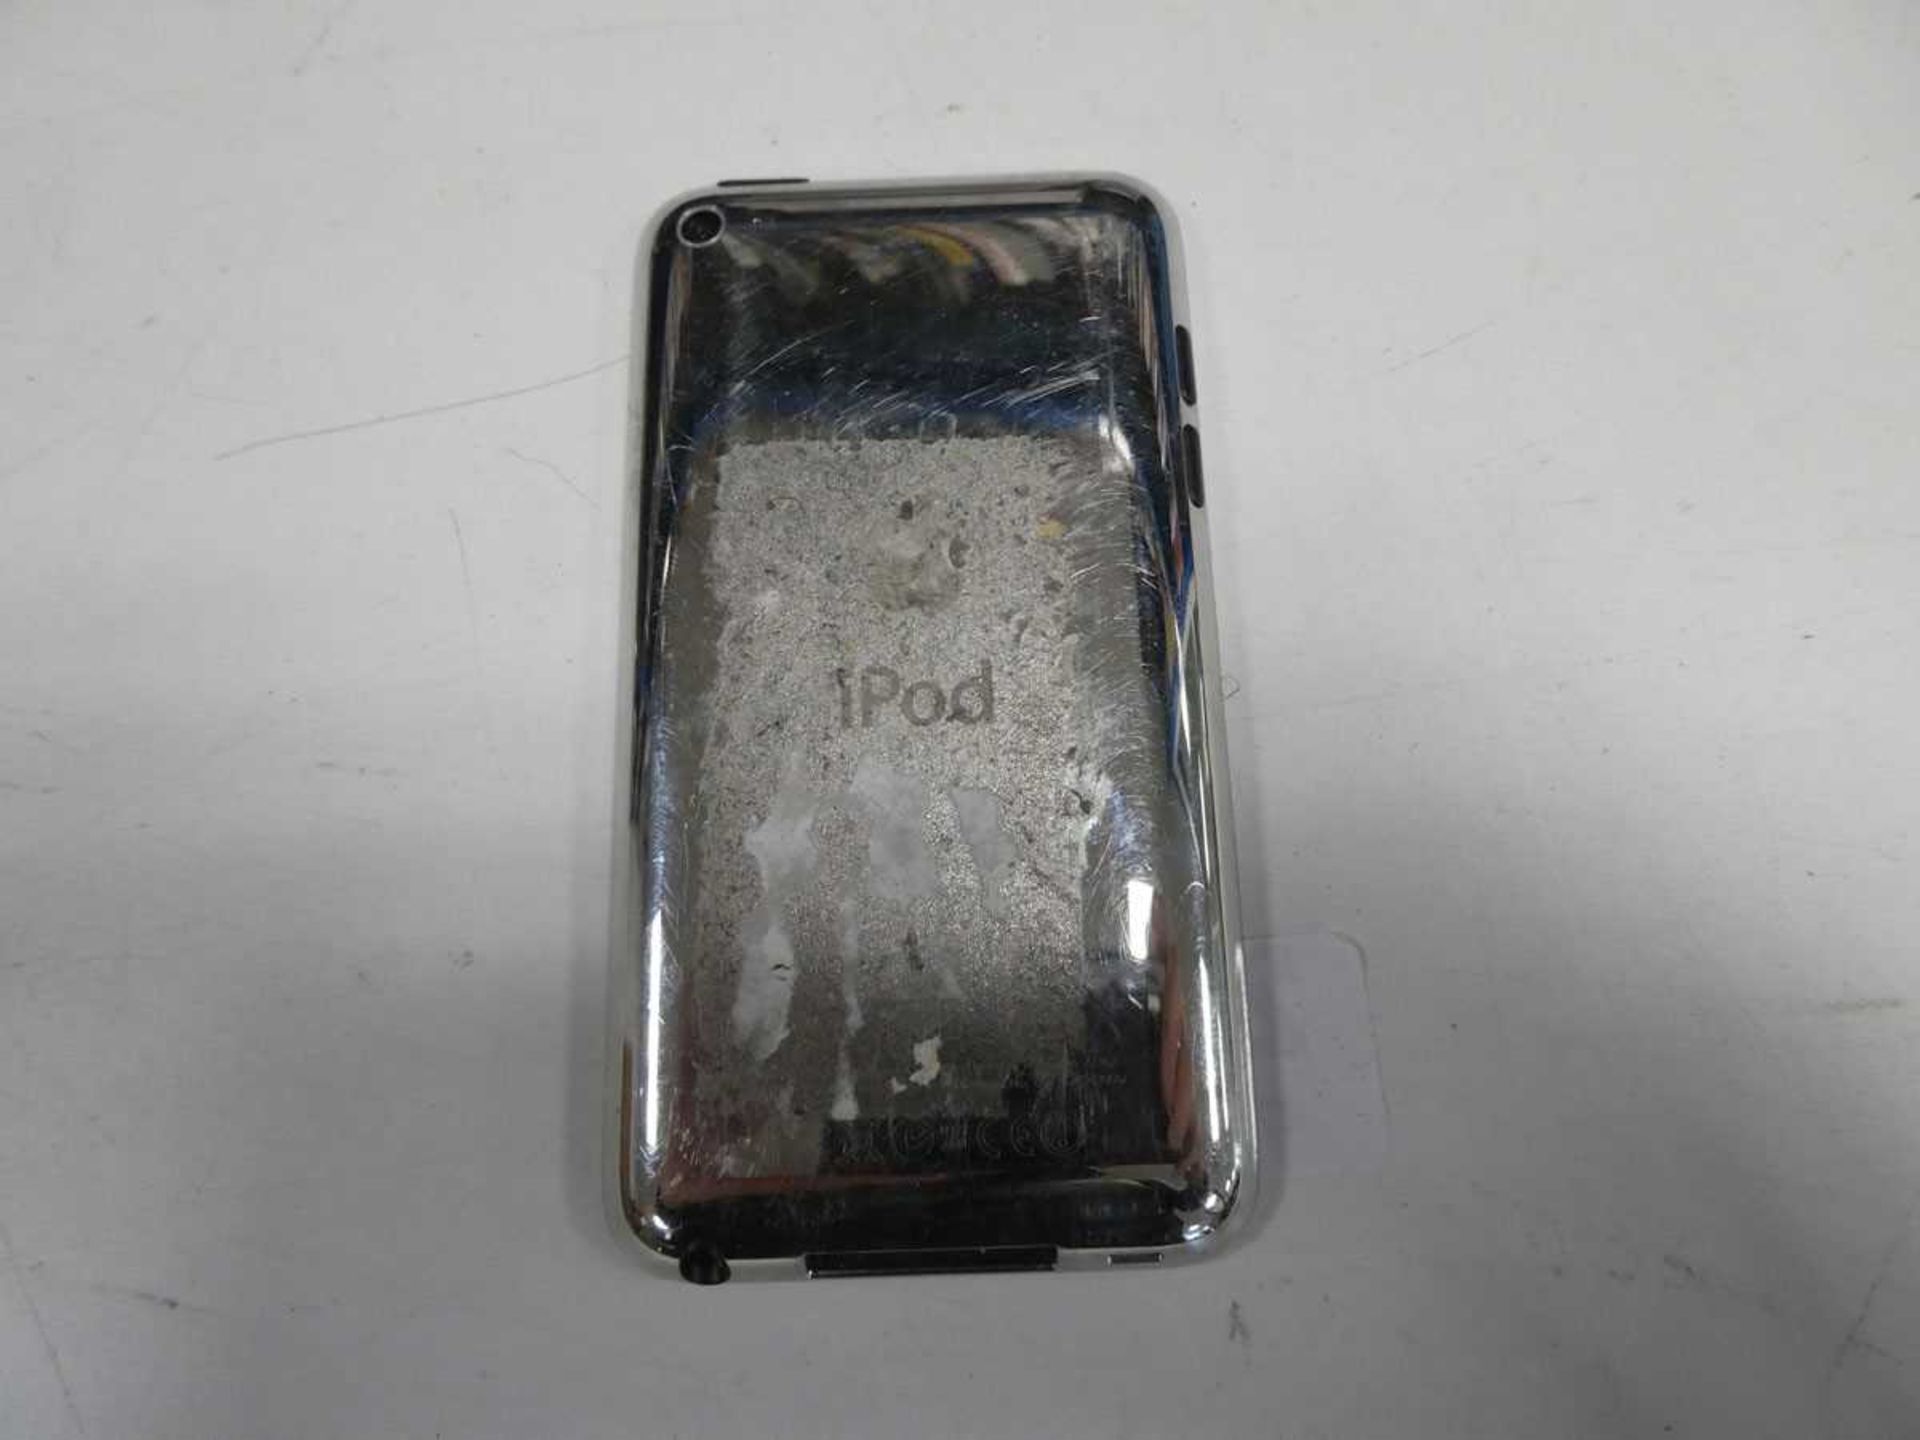 Apple iPod 8 GB, unboxed a1367 - Image 2 of 2